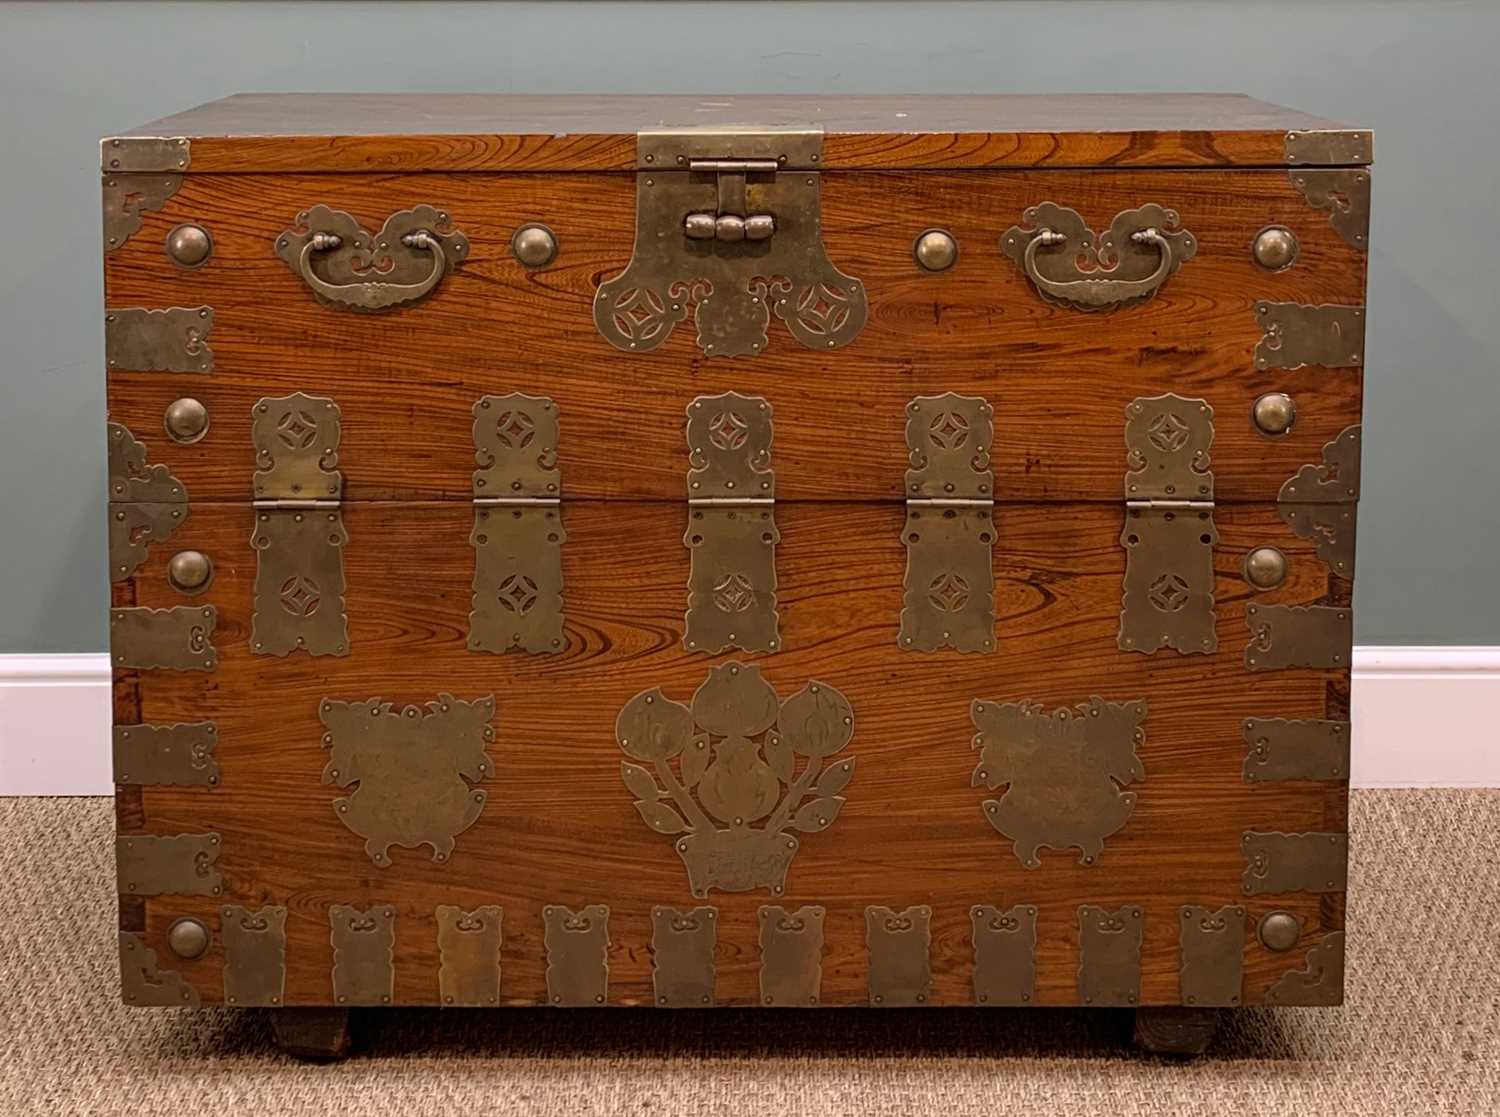 KOREAN ELM CHEST, 20th Century, with brass fittings, upper hinged panel door opeing to reveal